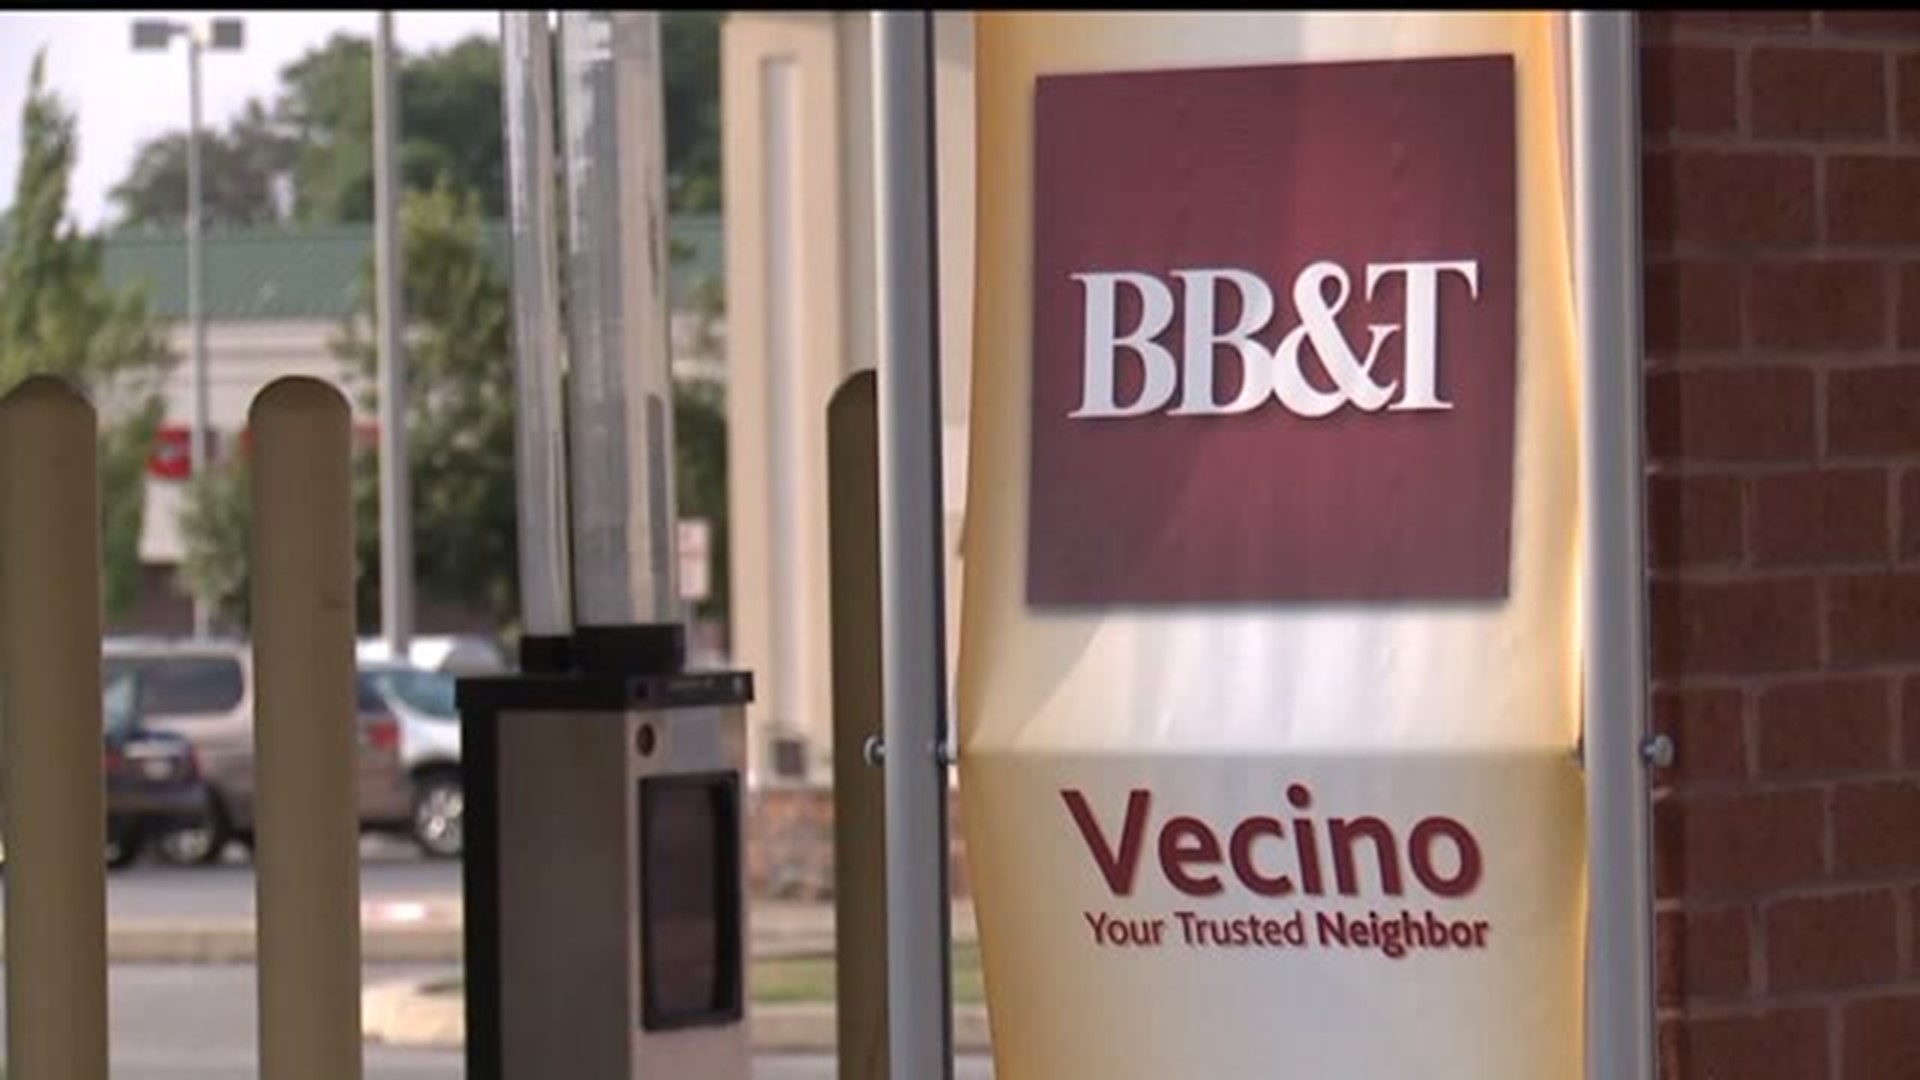 FOX43 Finds Out: Did a banking issue compromise your information?